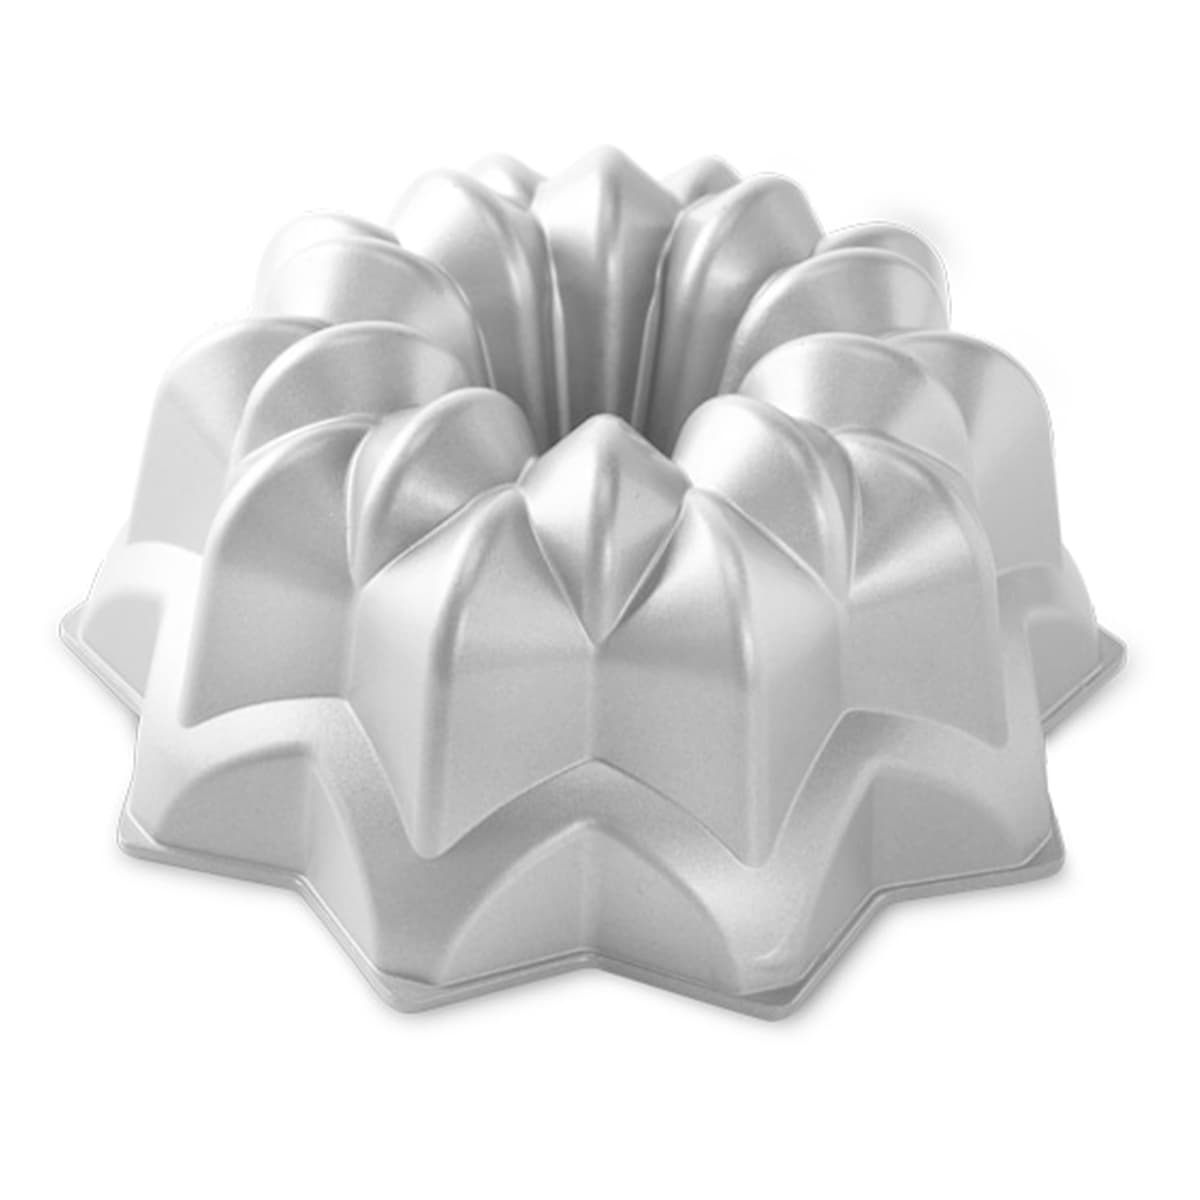 Nordicware Assorted Colors Bundt Pan - The Peppermill